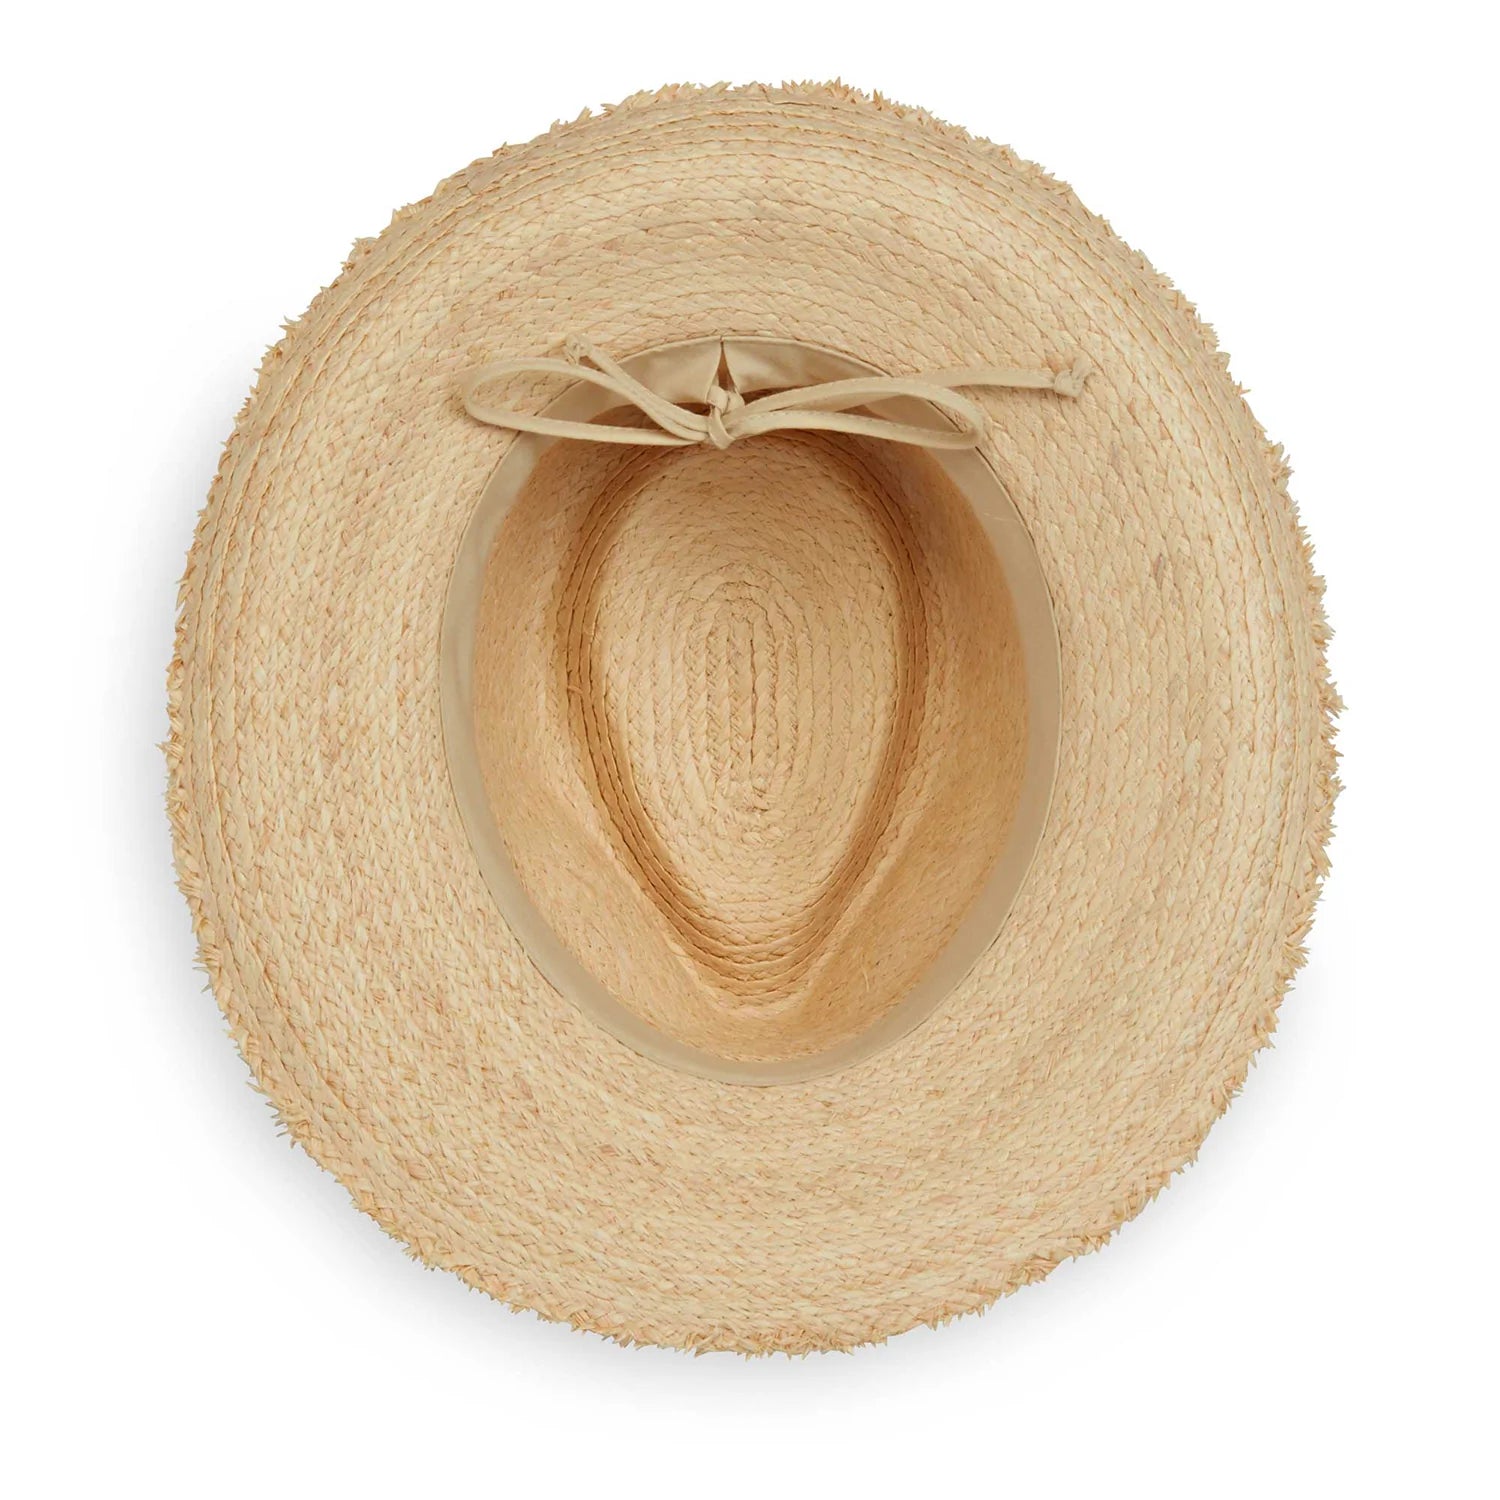 Light fraying on the brim and a natural fiber weave gives this hat the perfect look for outdoor festivals or an island tiki bar. Black ribbon and braided raffia trim adds a unique touch.